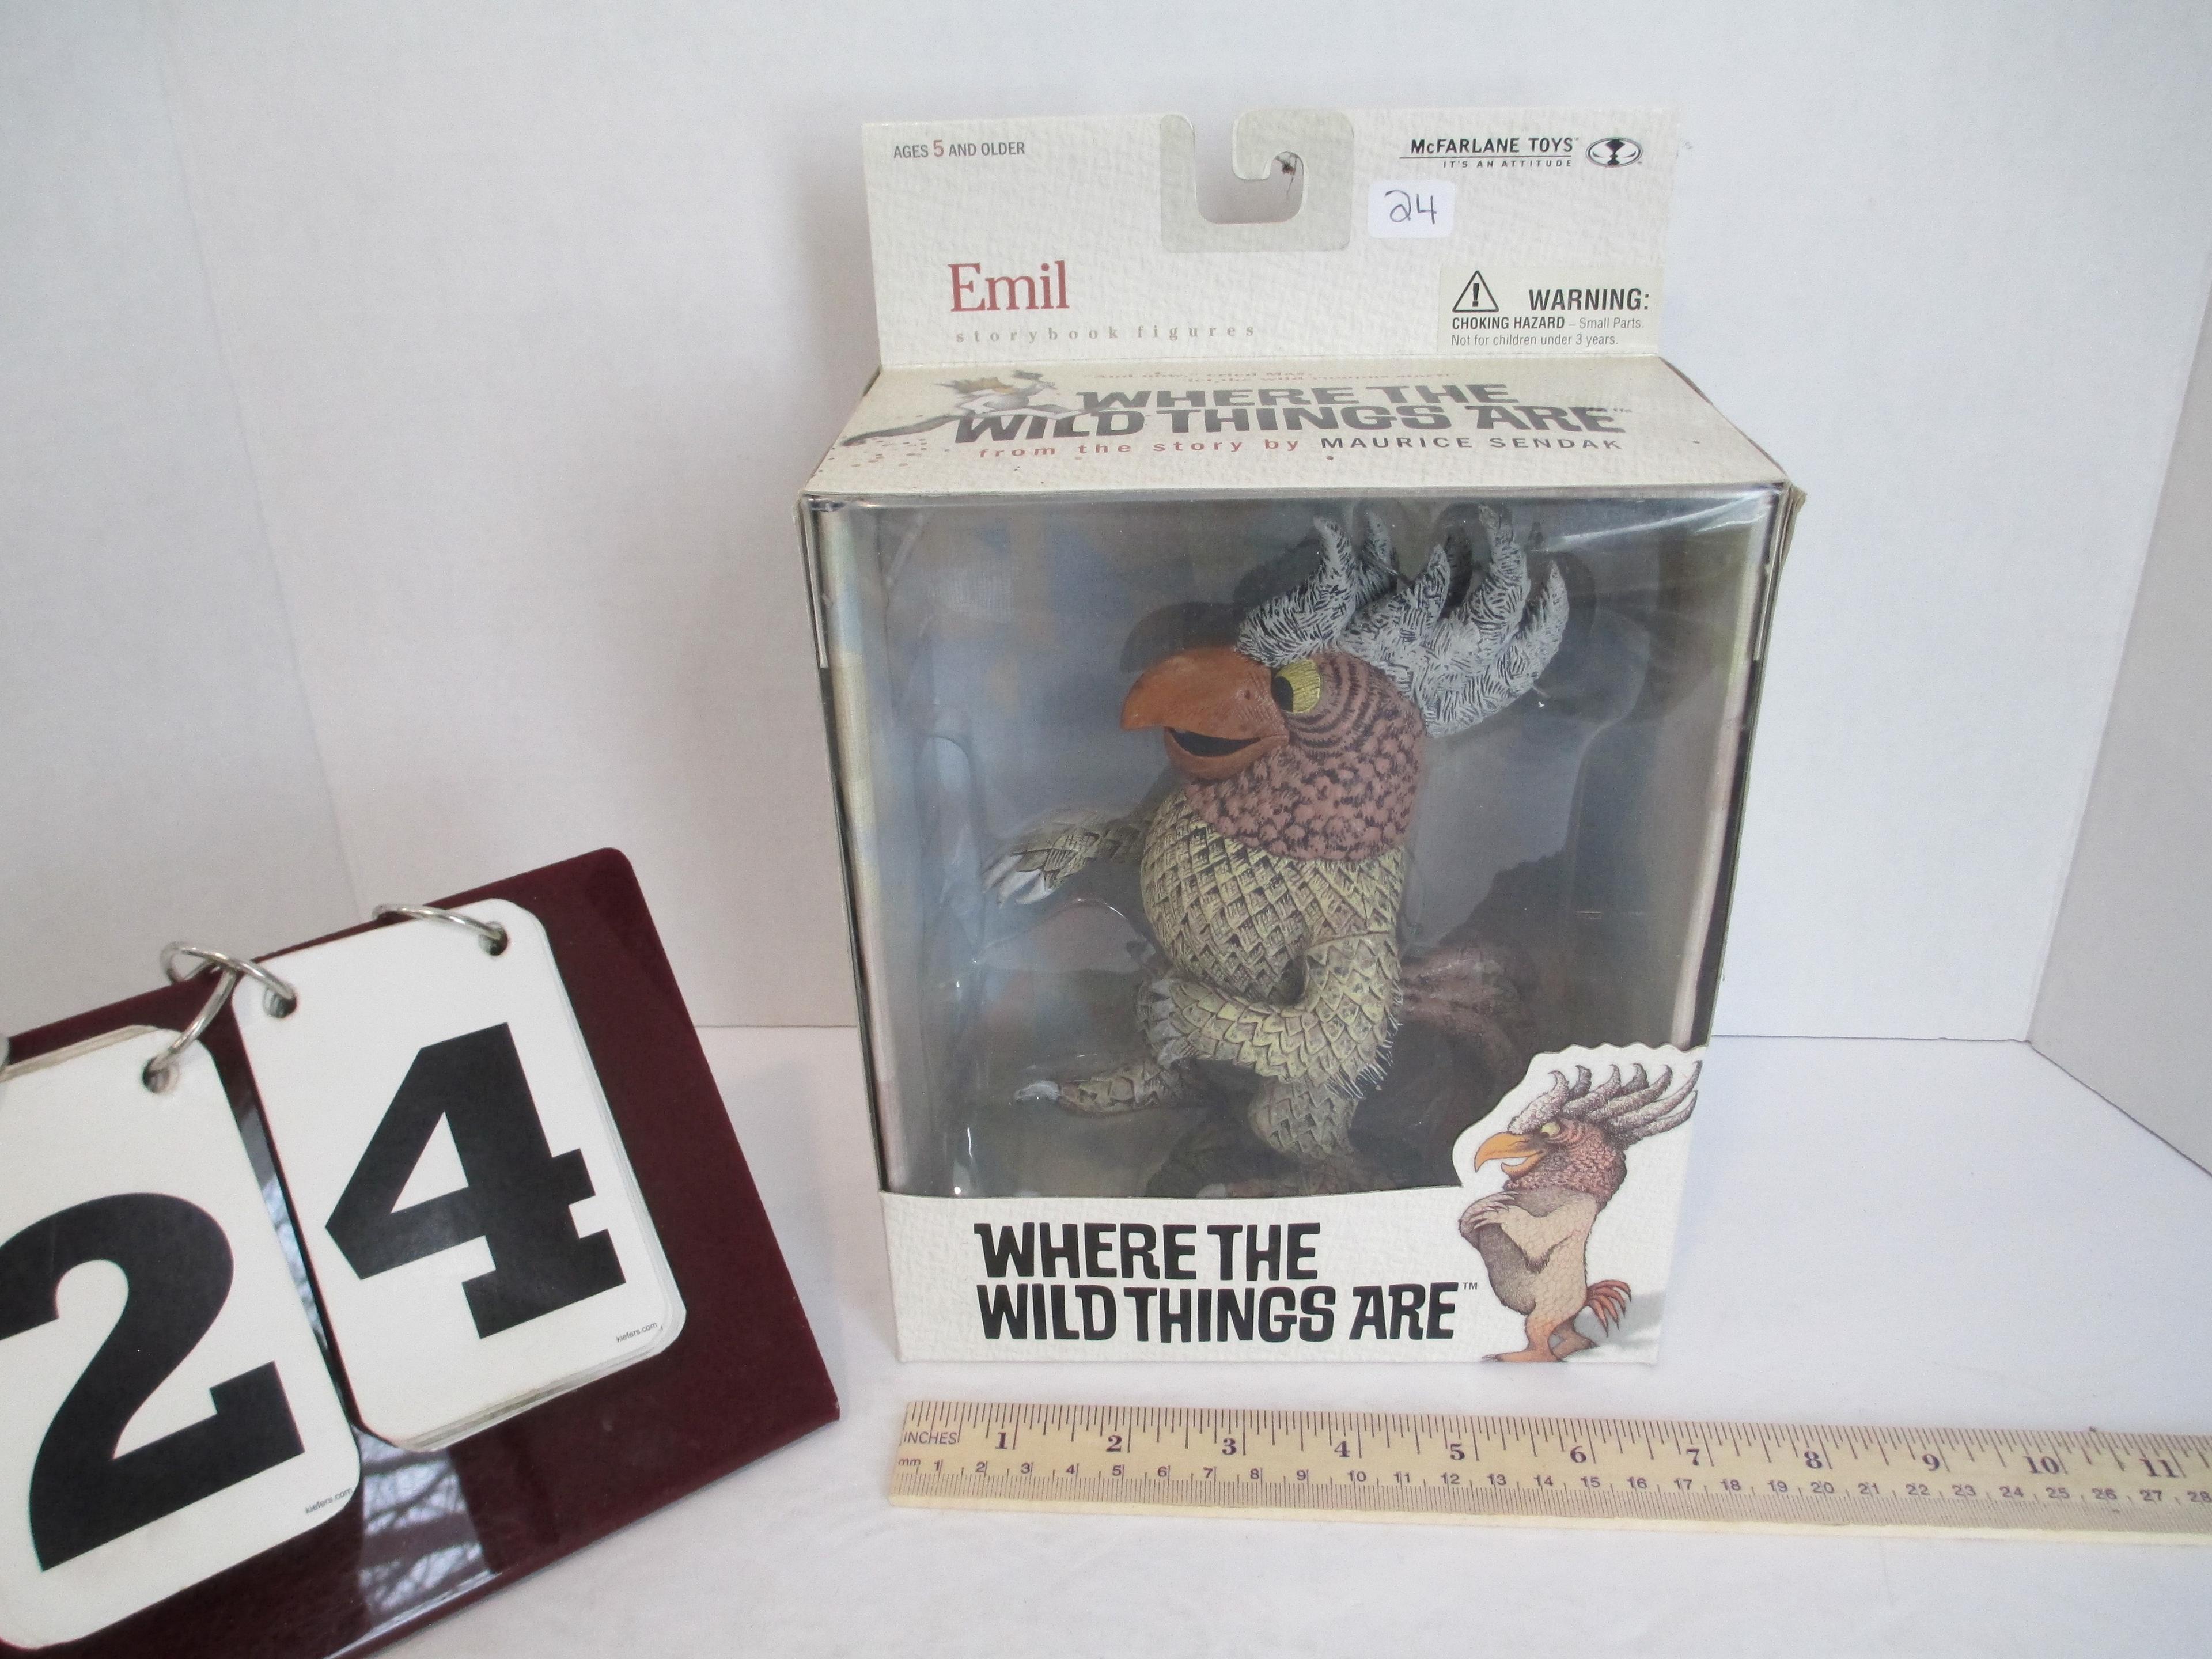 McFarlane Toys Where the Wild Things Are- Emil